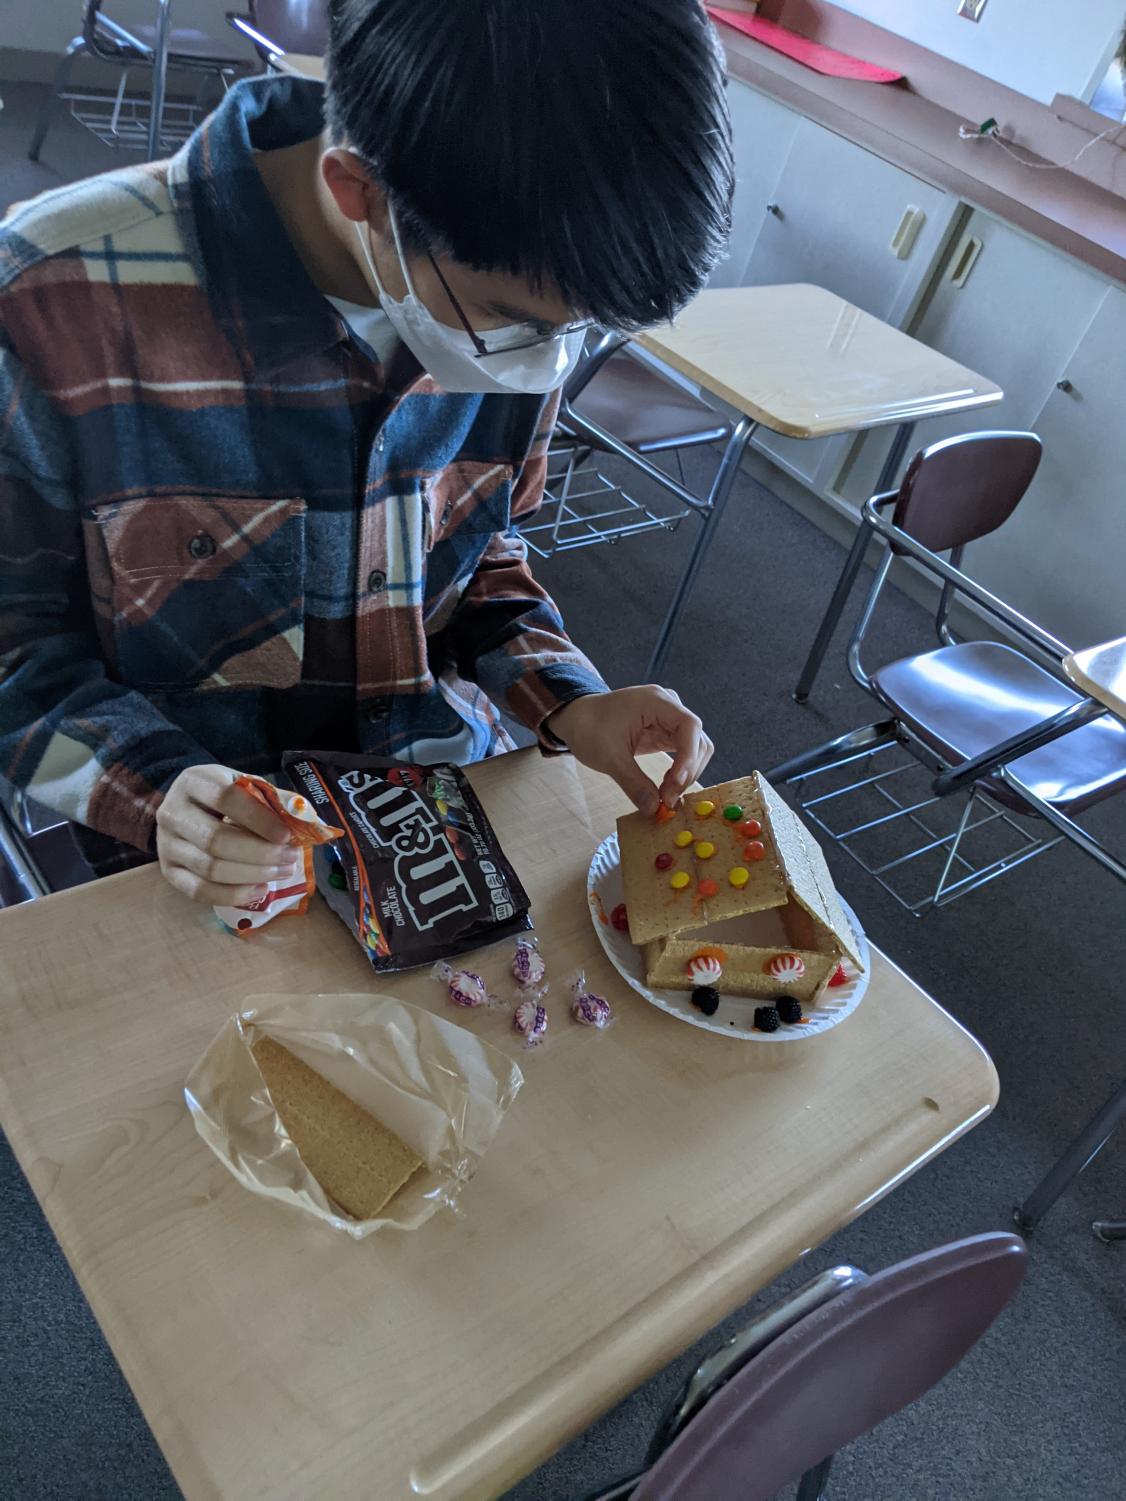 Photo Credit: Jennifer Ibanez
Junior James Kim adds candy decorations to the roof of a carefully created lebkuchenhaus (traditional German Gingerbread house) during the German Club meeting on Dec. 6. Photo courtesy of Jennifer Ibanez 
